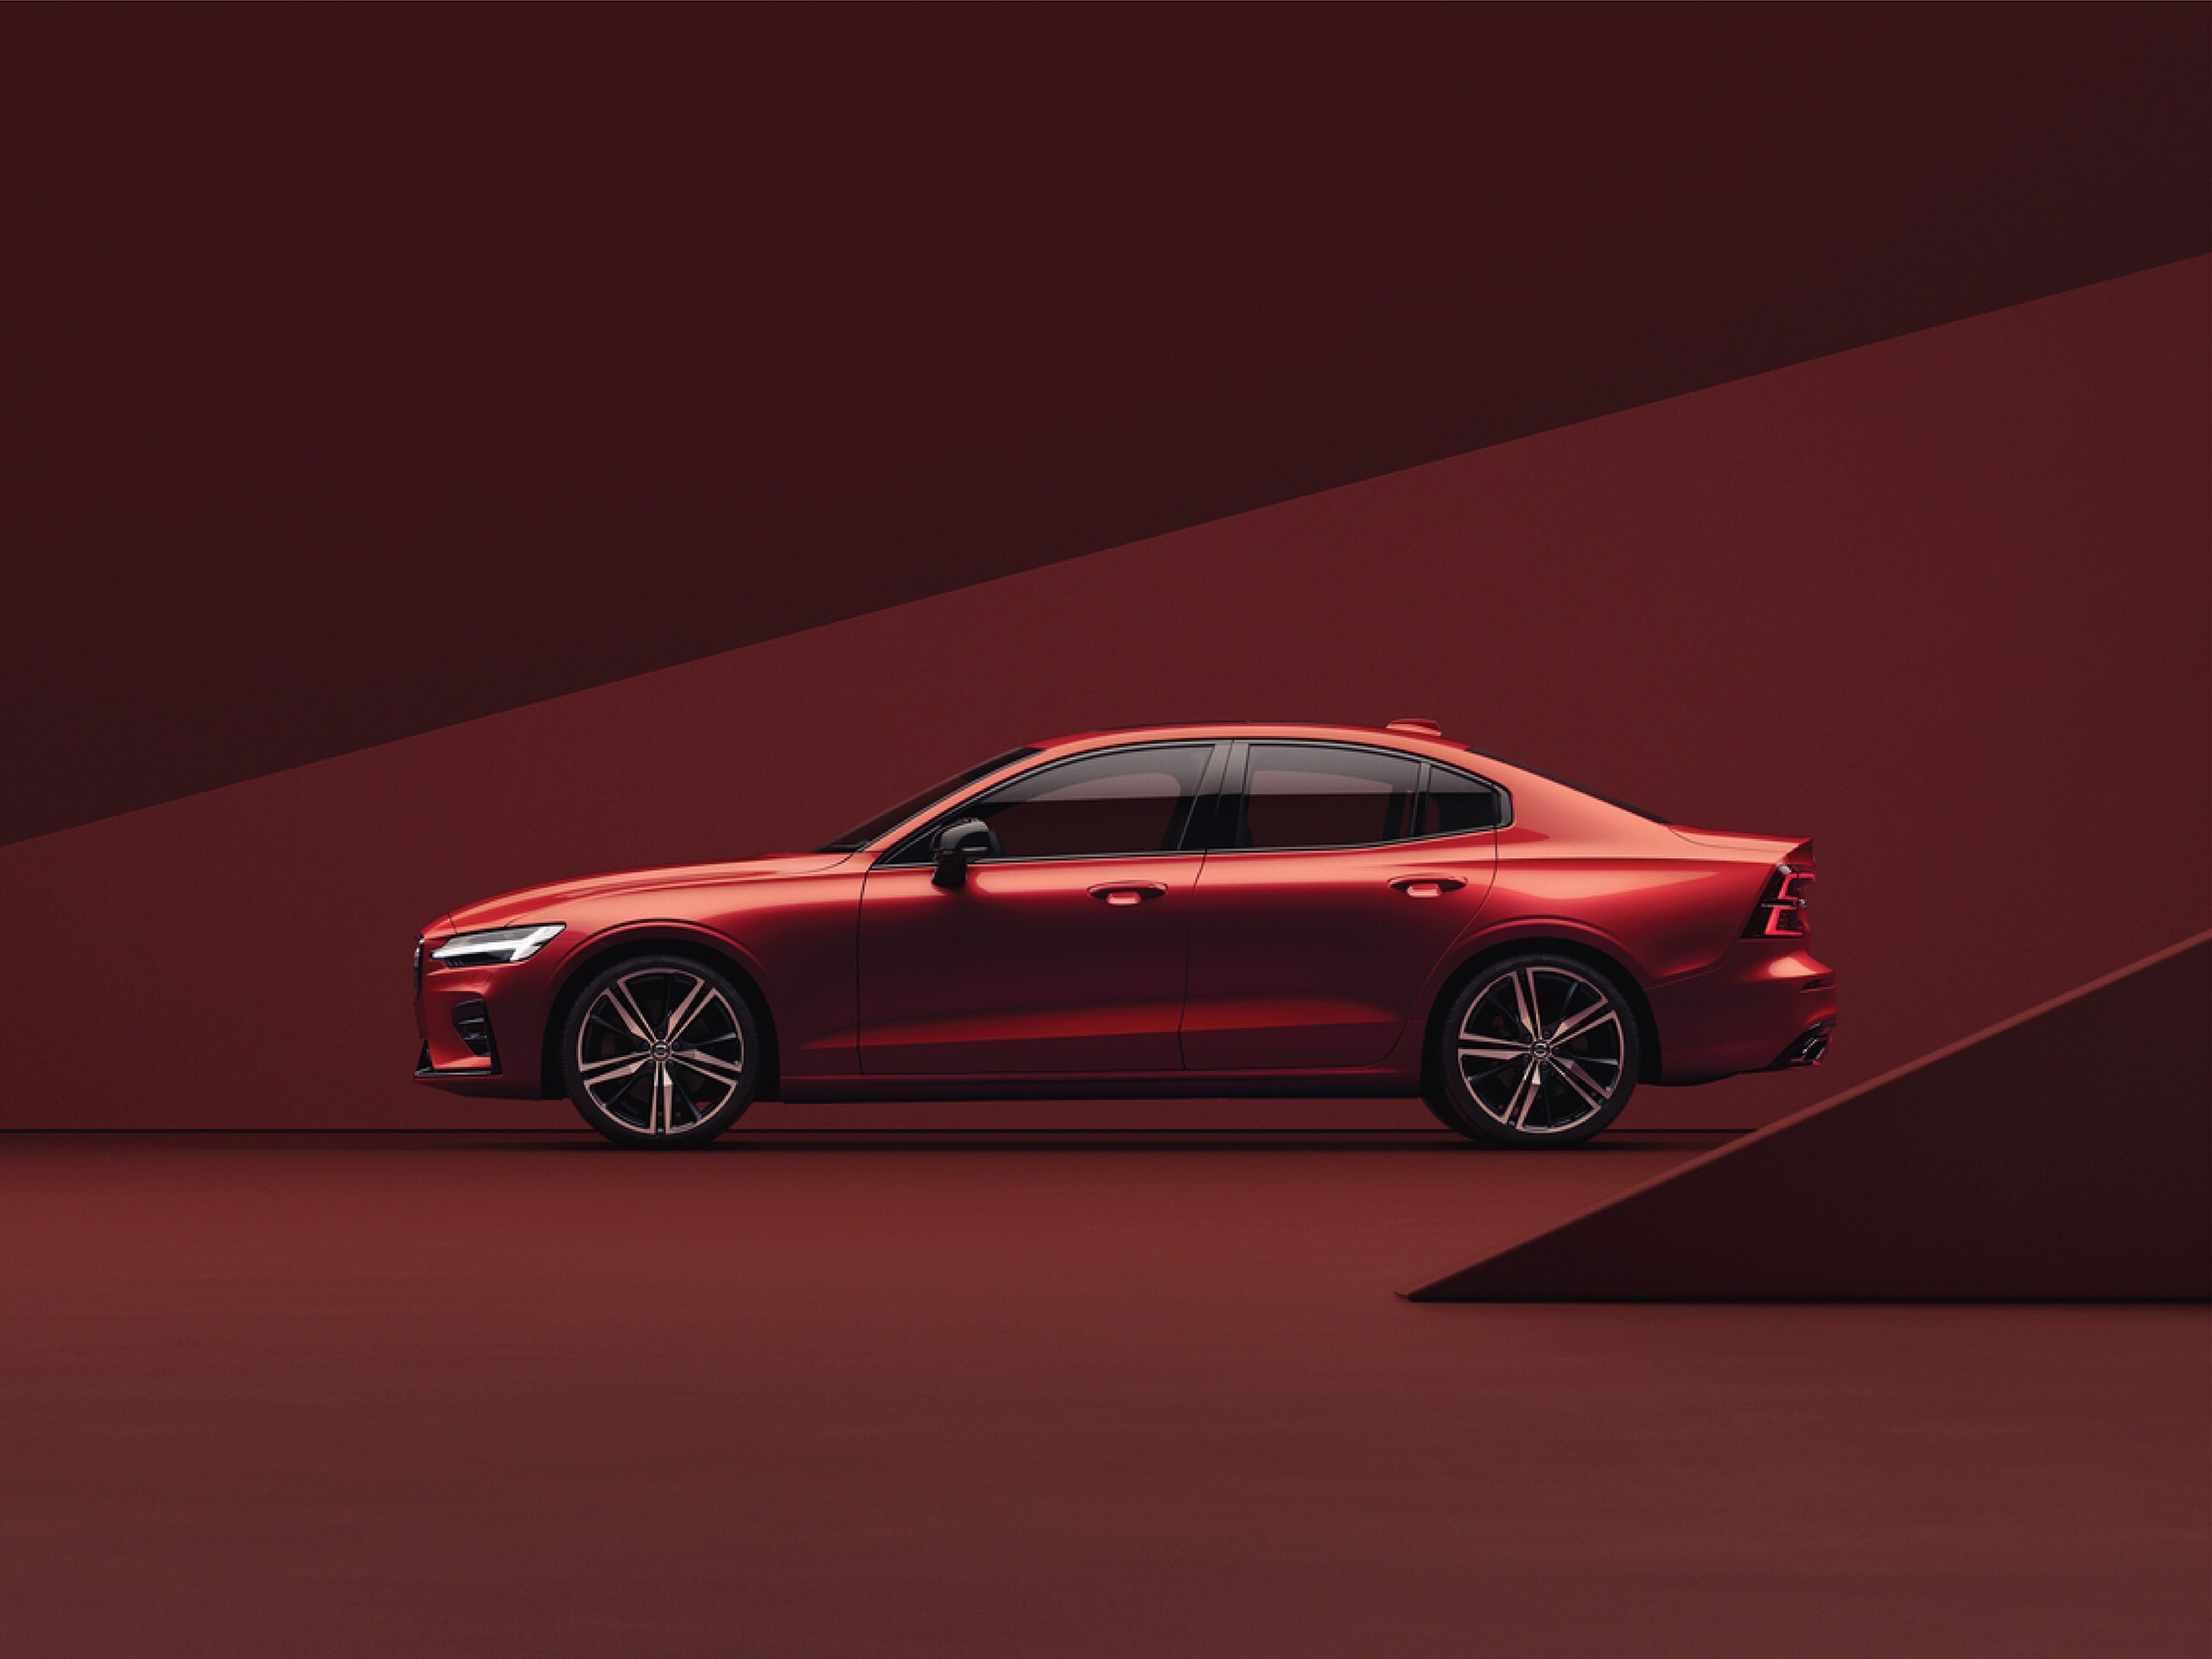 One more car. To help save more lives. The all-new Volvo S60.